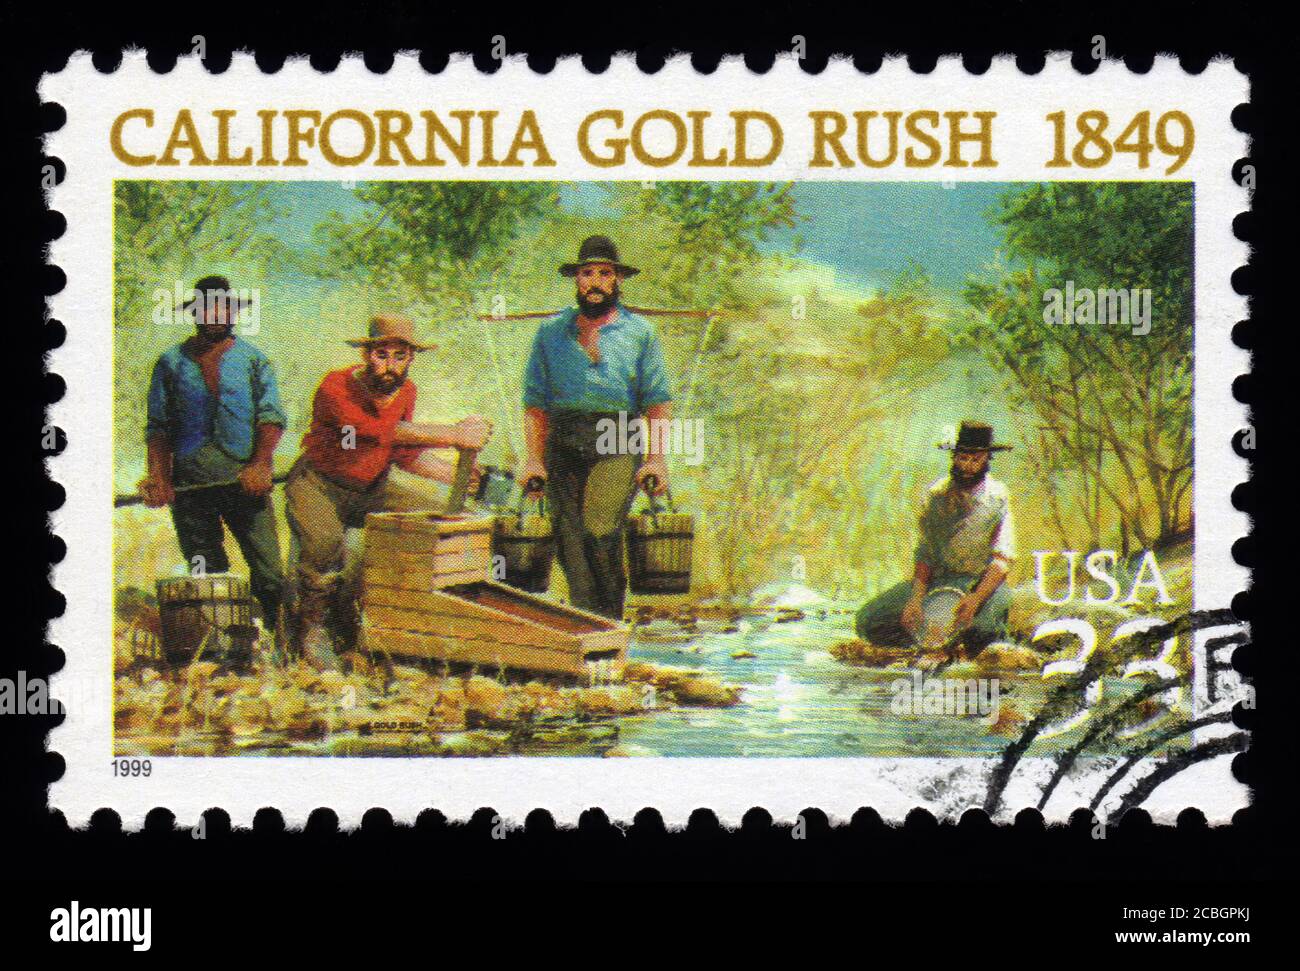 London, UK, February 5 2011 - Vintage 1999 USA cancelled postage stamp  showing an image of California Gold Rush miners panning for gold stamp collect Stock Photo